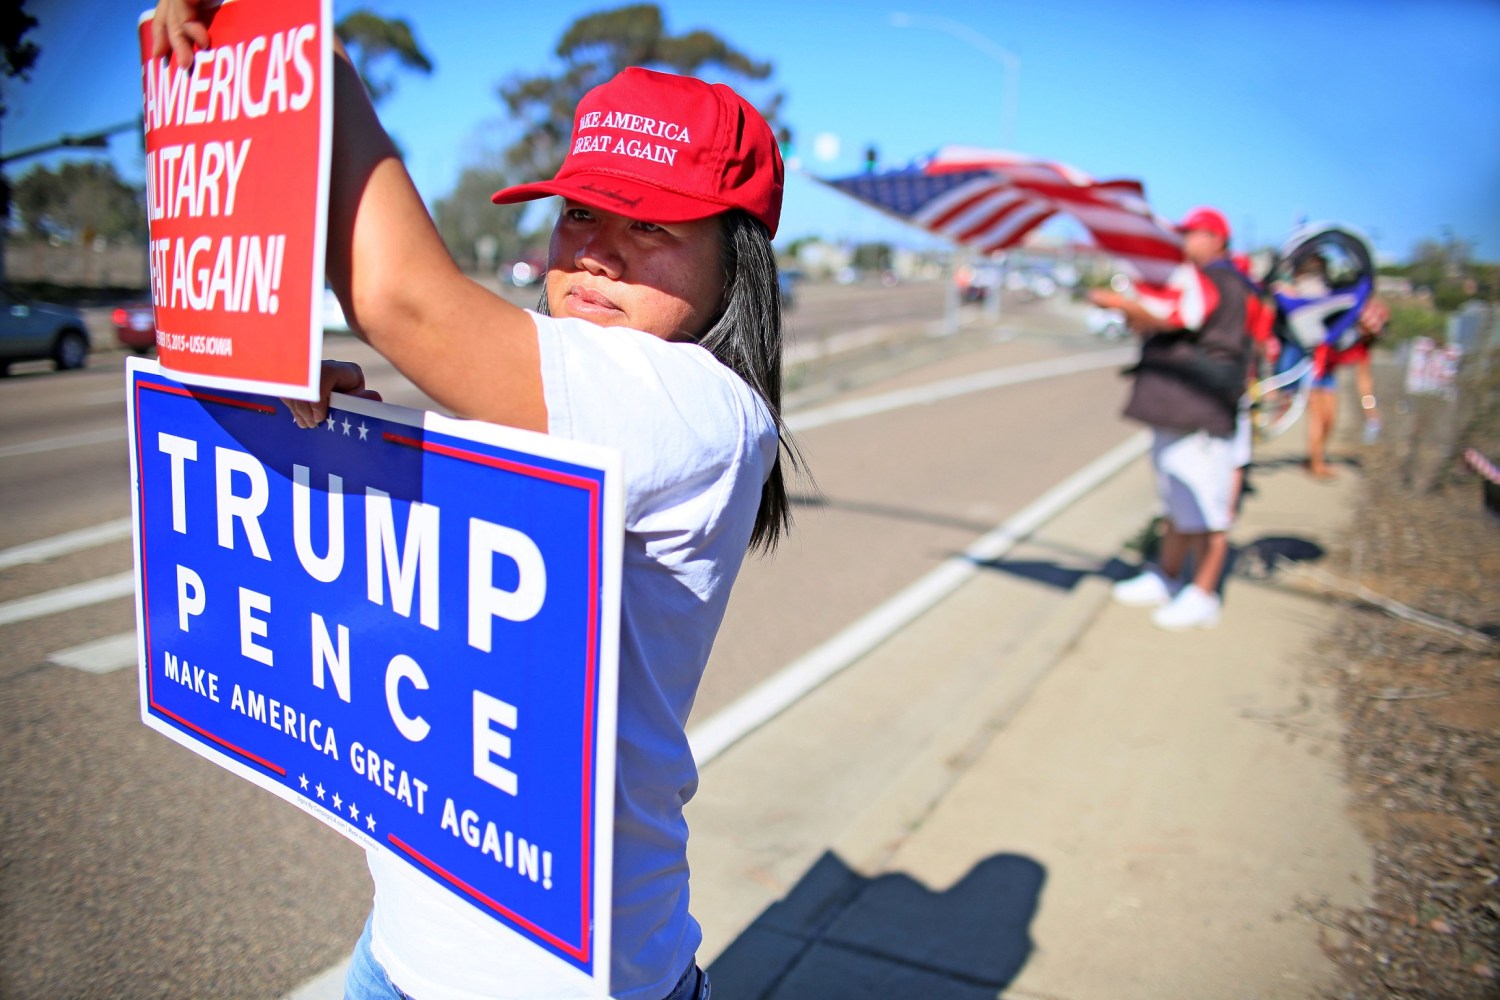 Demonstrator Ly Kou holds a sign along with others in support of President elect Donald Trump outside of Camp Pendleton in Oceanside, California U.S. November 11, 2016. REUTERS/Sandy Huffaker - RTX2TA8C